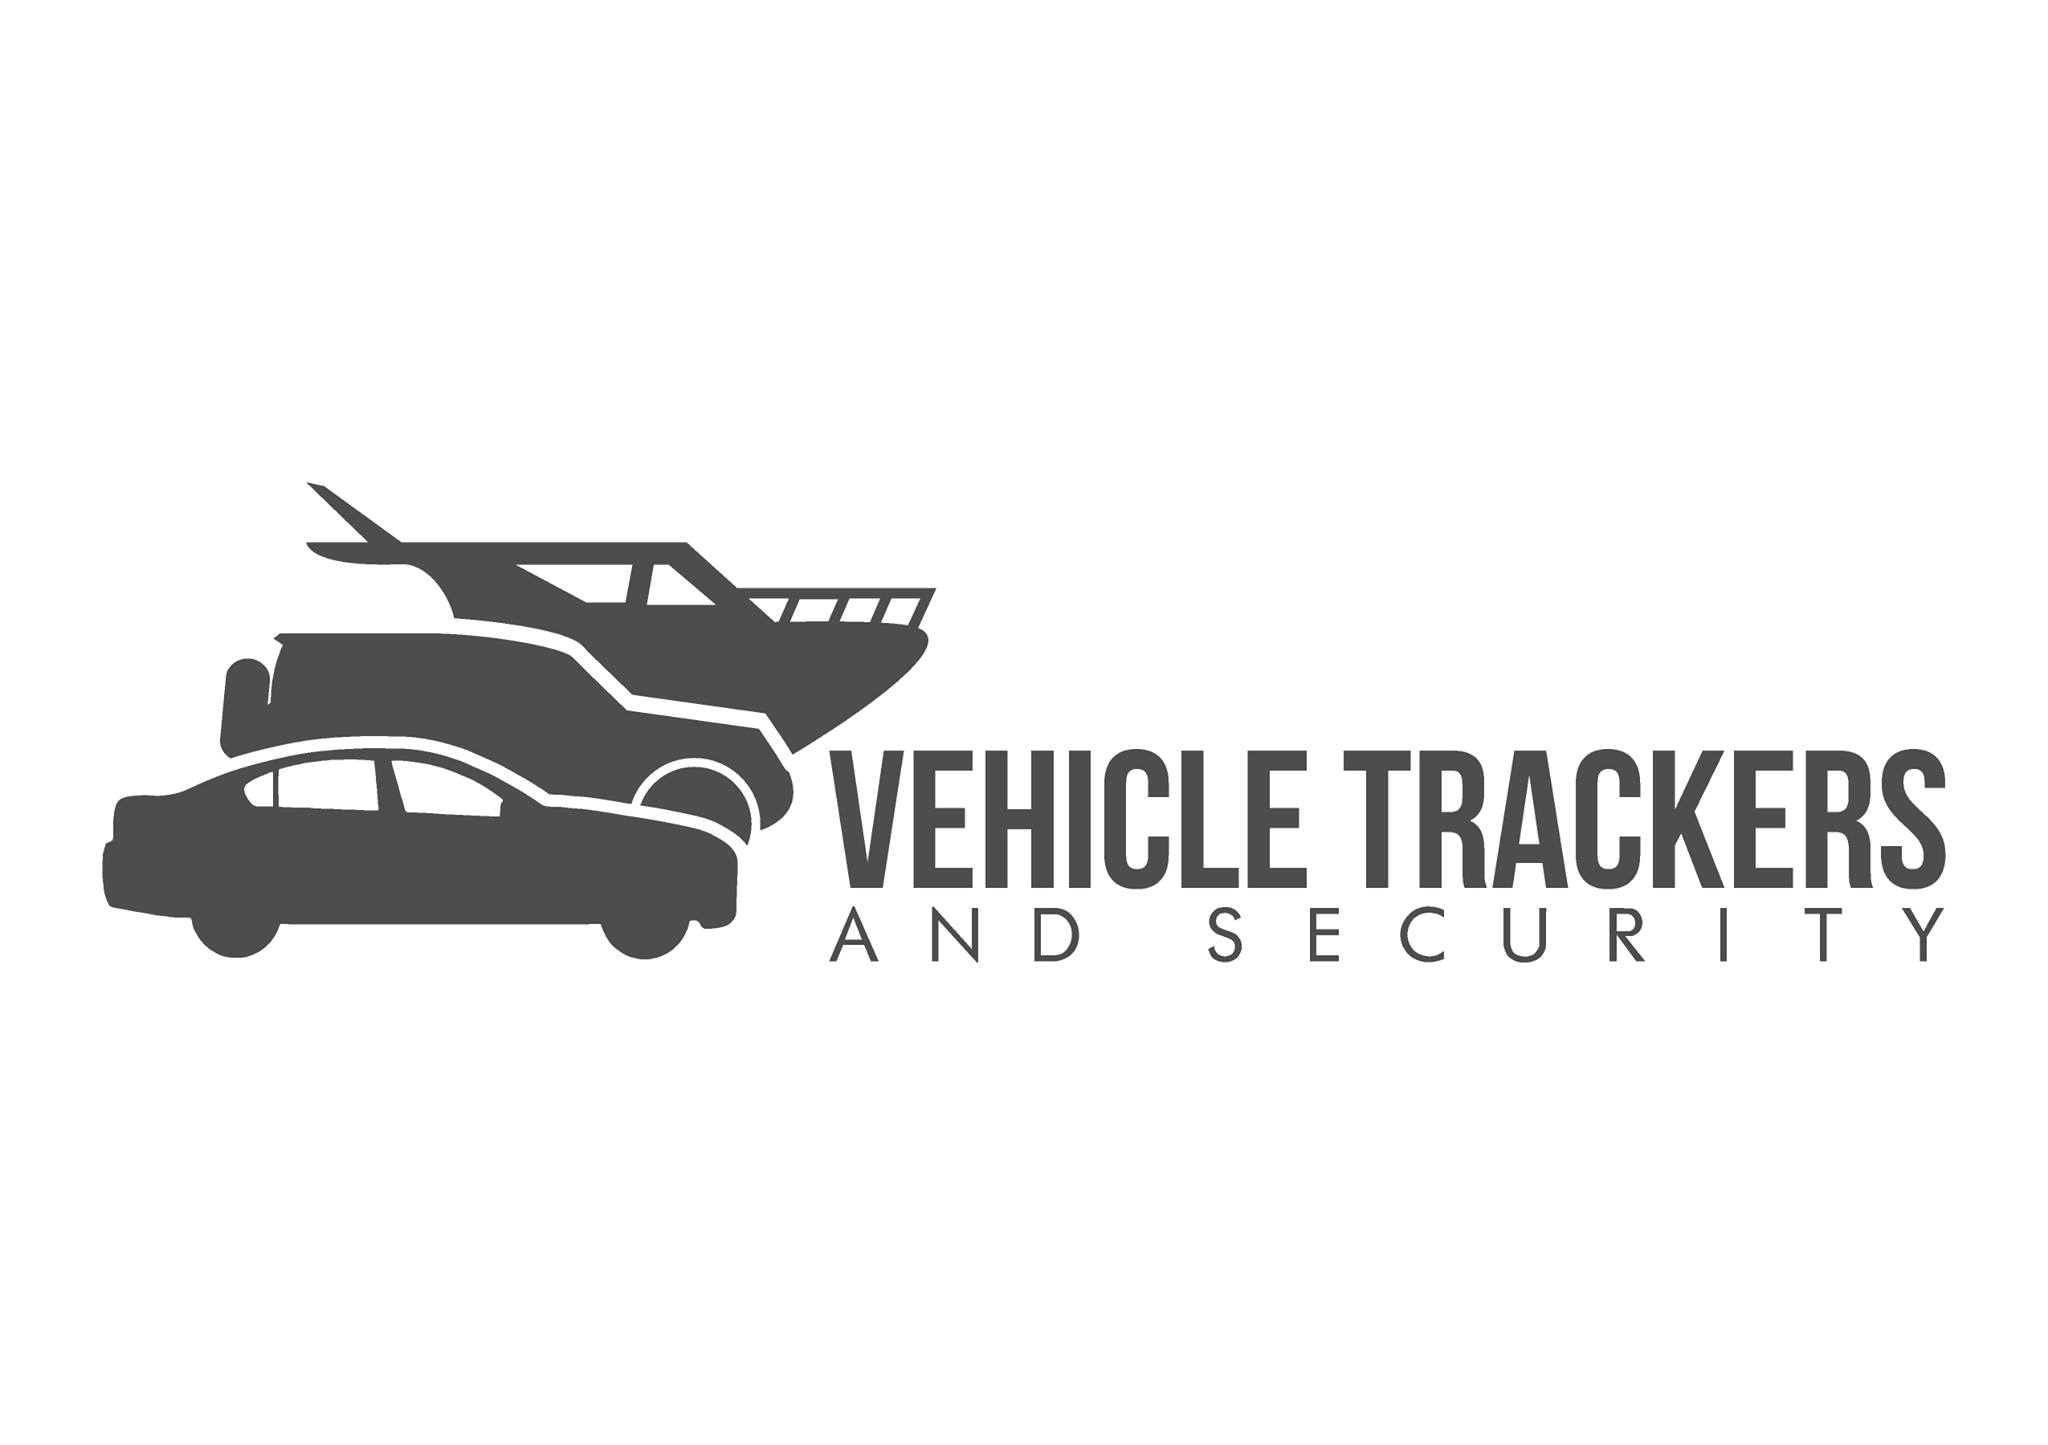 Vehicle Trackers and Security